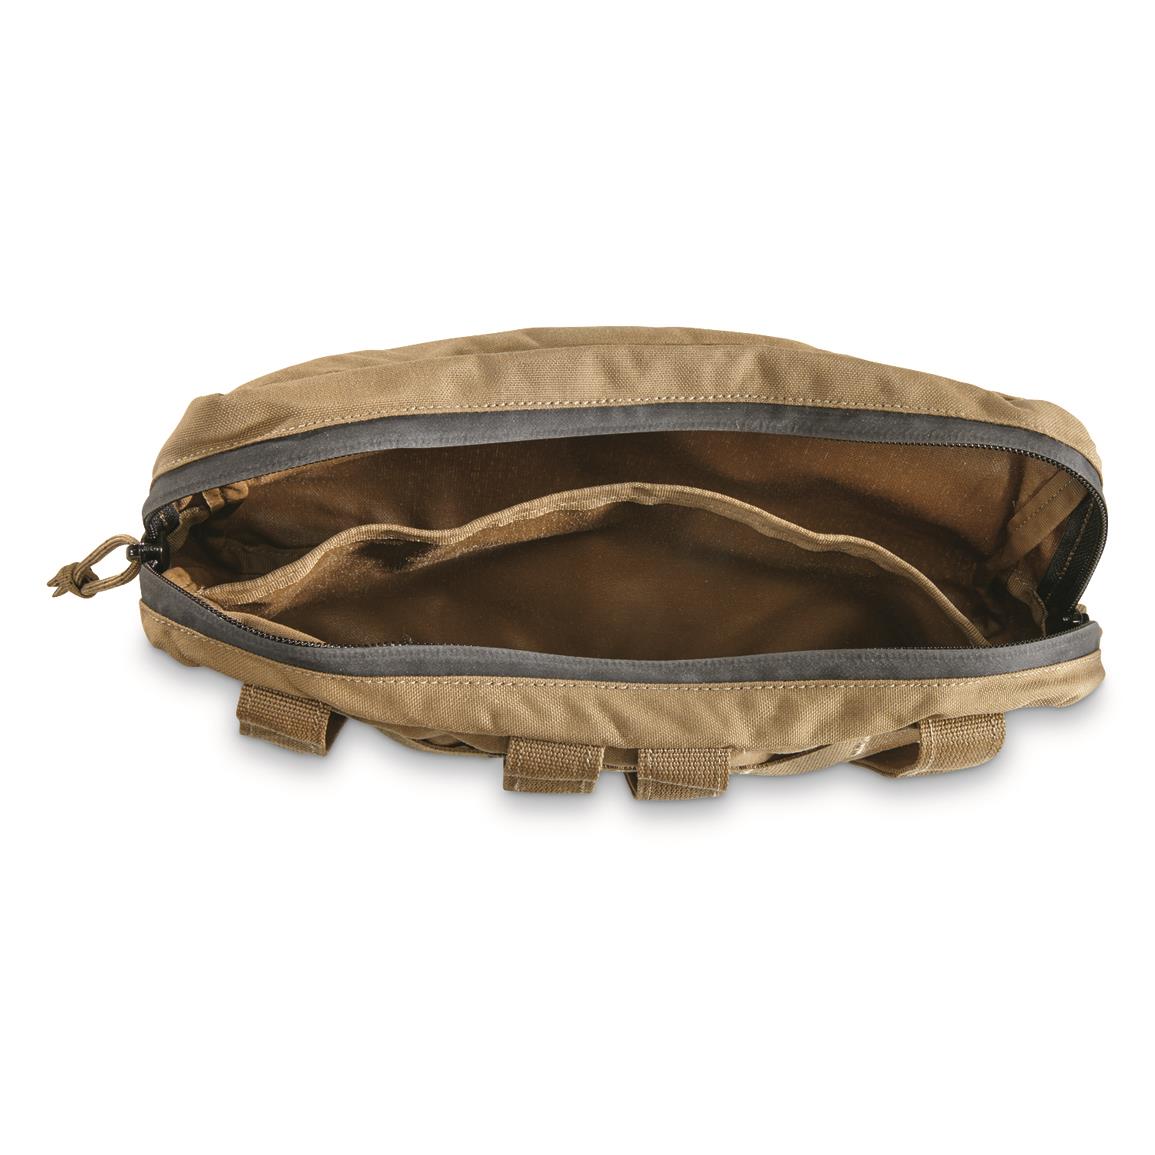 U.S. Military Surplus FILBE Assault Pouch, New - 705408, Military ...